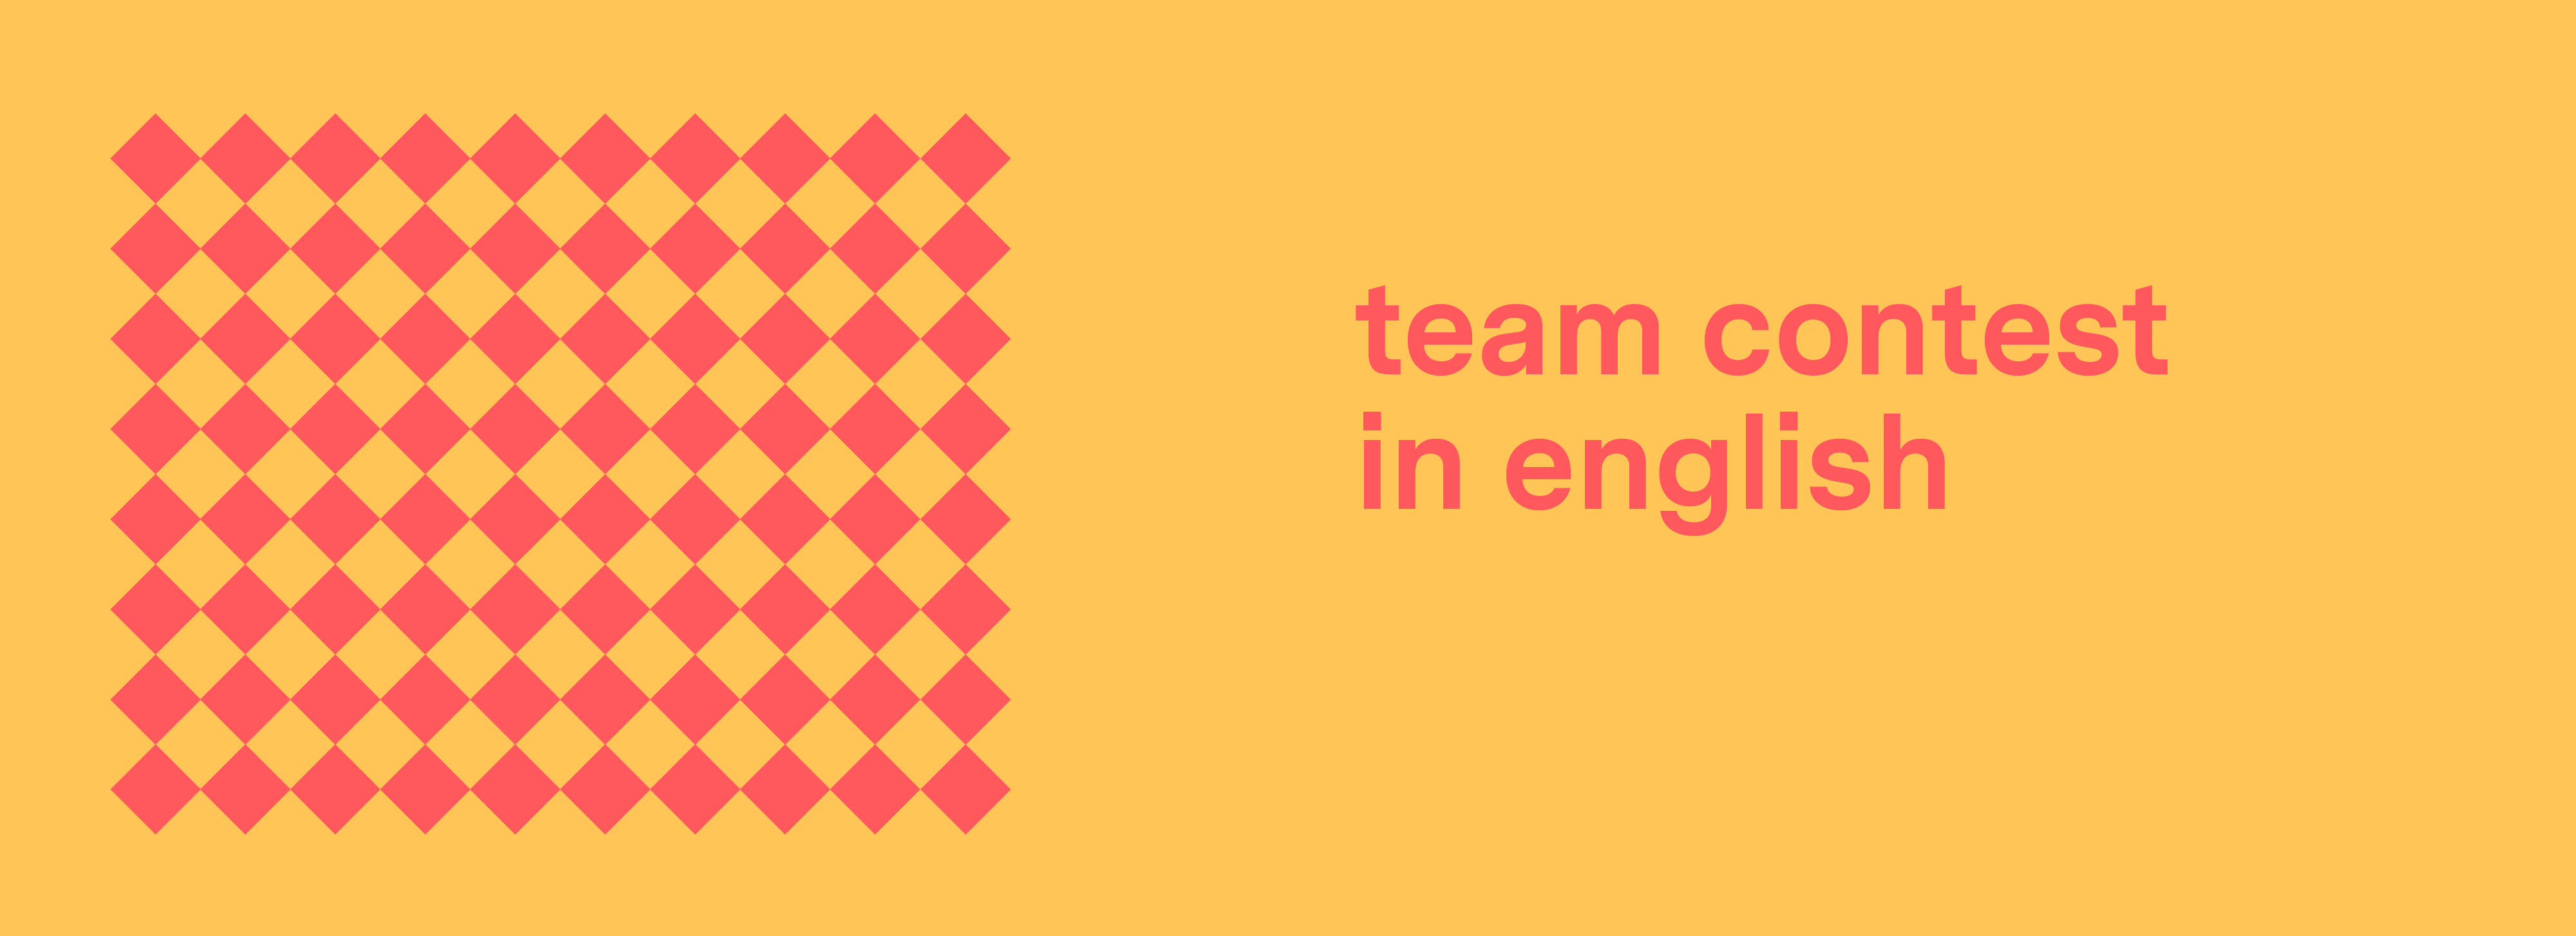 team-contest-in-english-large